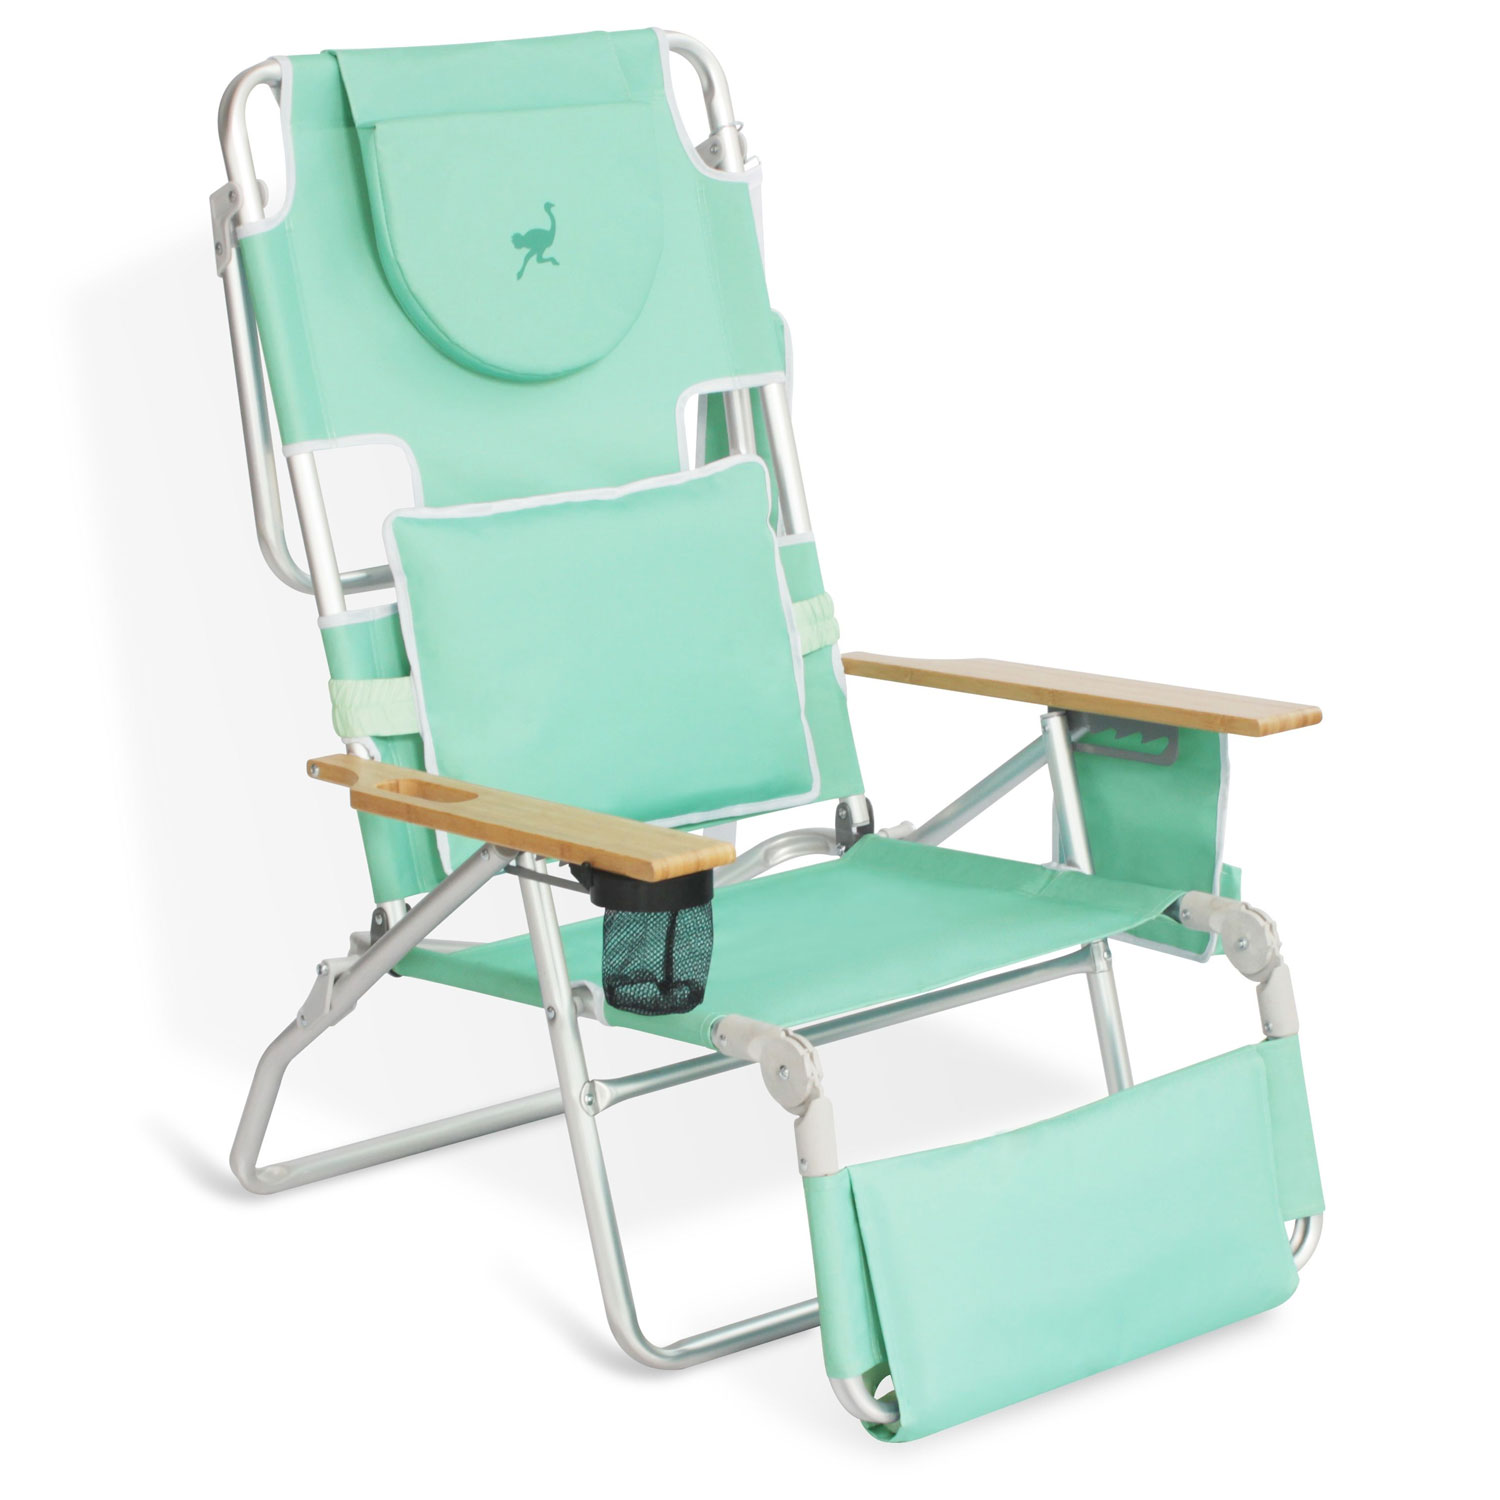  Ostrich 3 In 1 Deluxe Beach Chair In Blue for Small Space